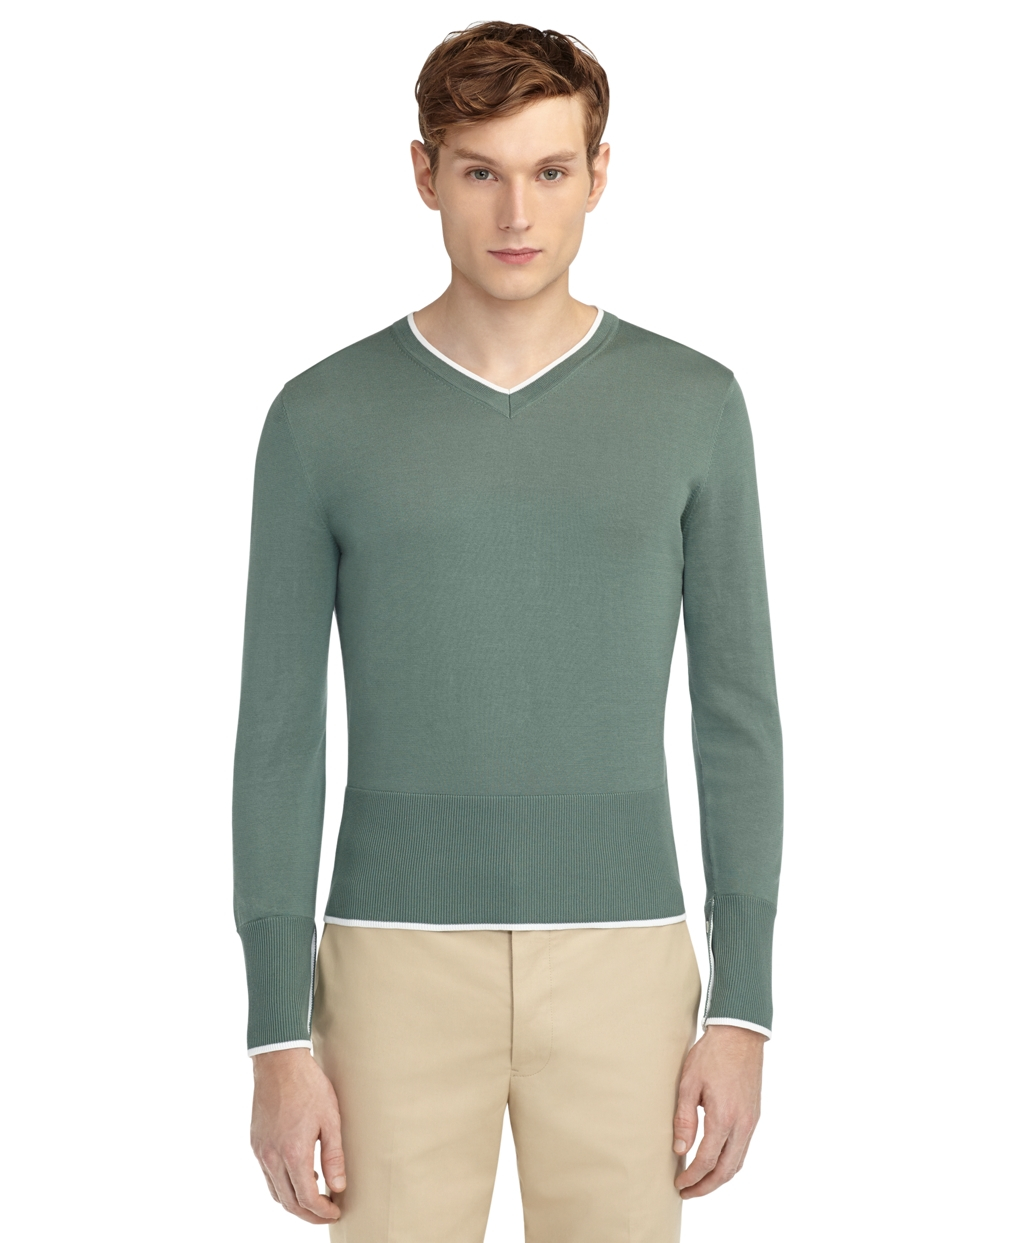 Green color sweater